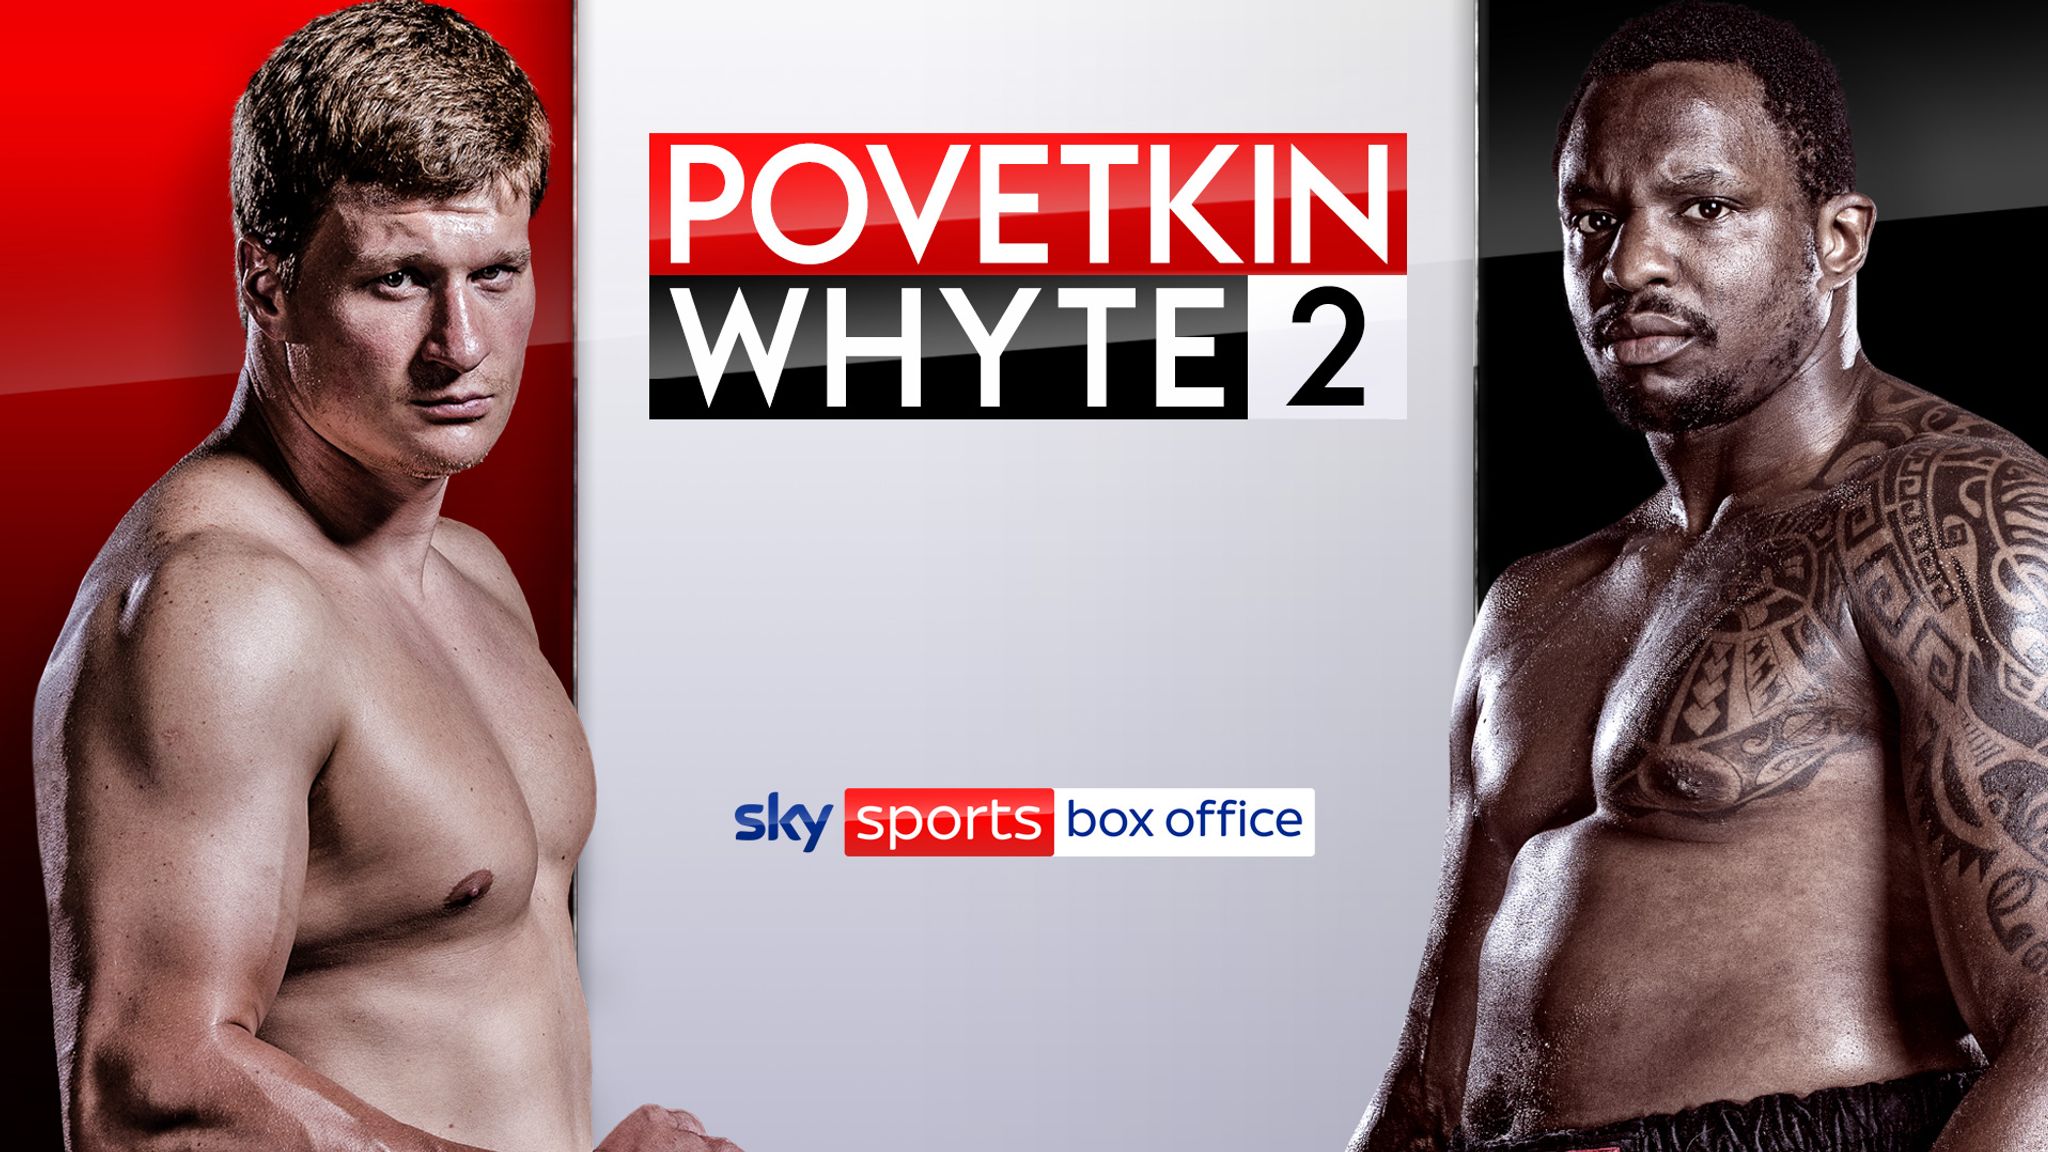 Povetkin vs Whyte 2 How to book and watch Povetkin vs Whyte 2 if you are not a Sky TV subscriber Boxing News Sky Sports